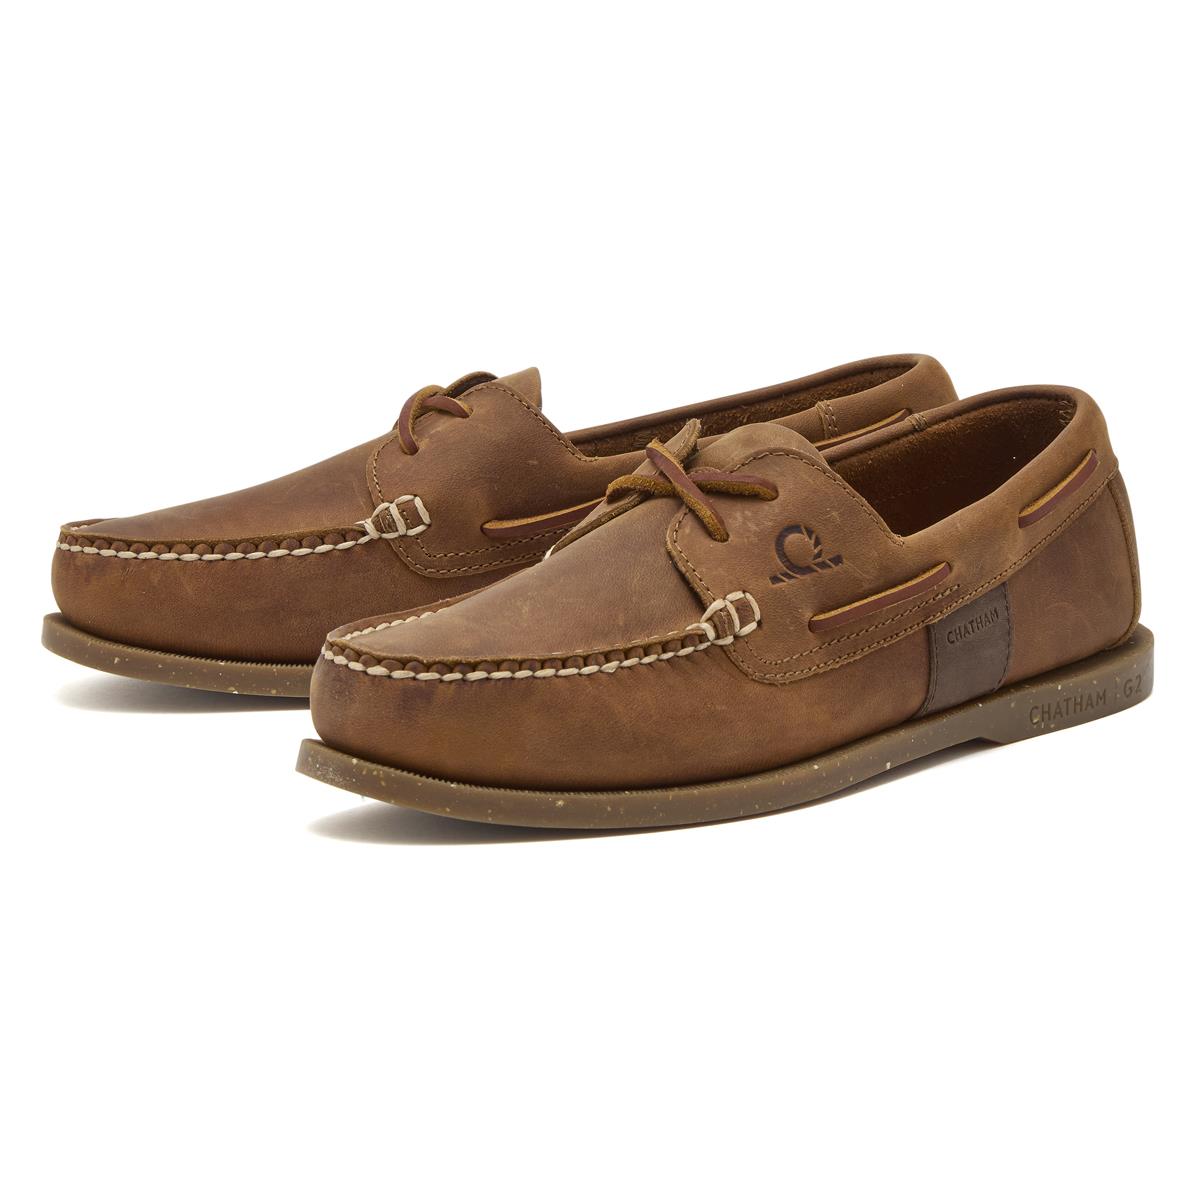 Chatham Mens Java II G2 Deck Shoes Questions & Answers